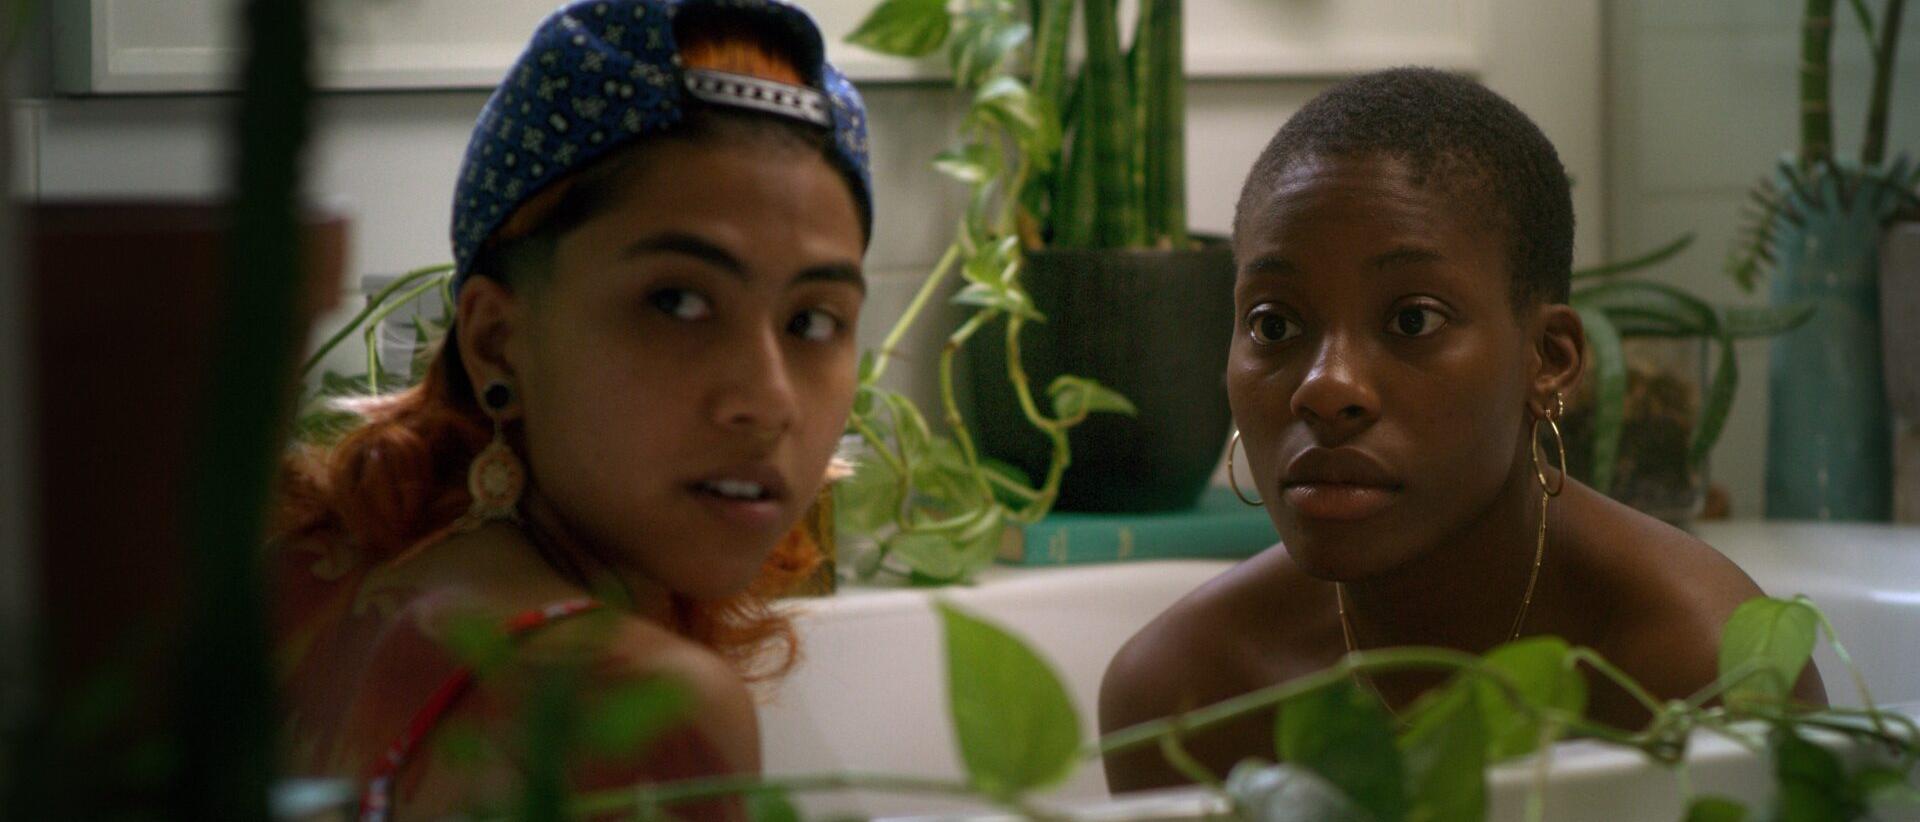 a still from Leyla & Noor, featuring two people sitting in a bathtub